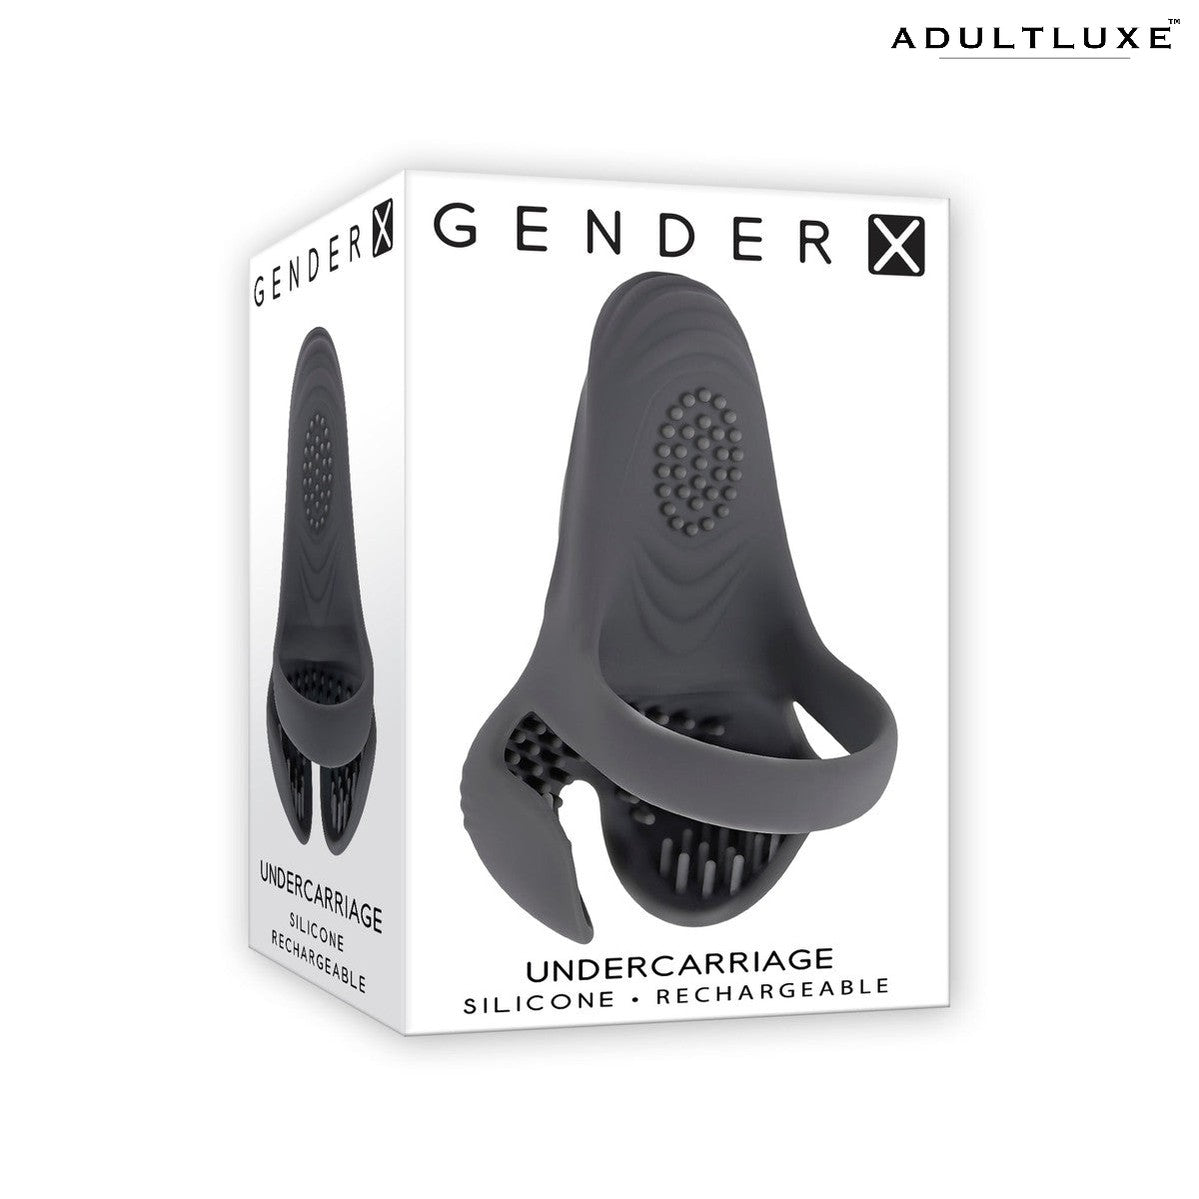 Gender X Undercarriage Cock Ring